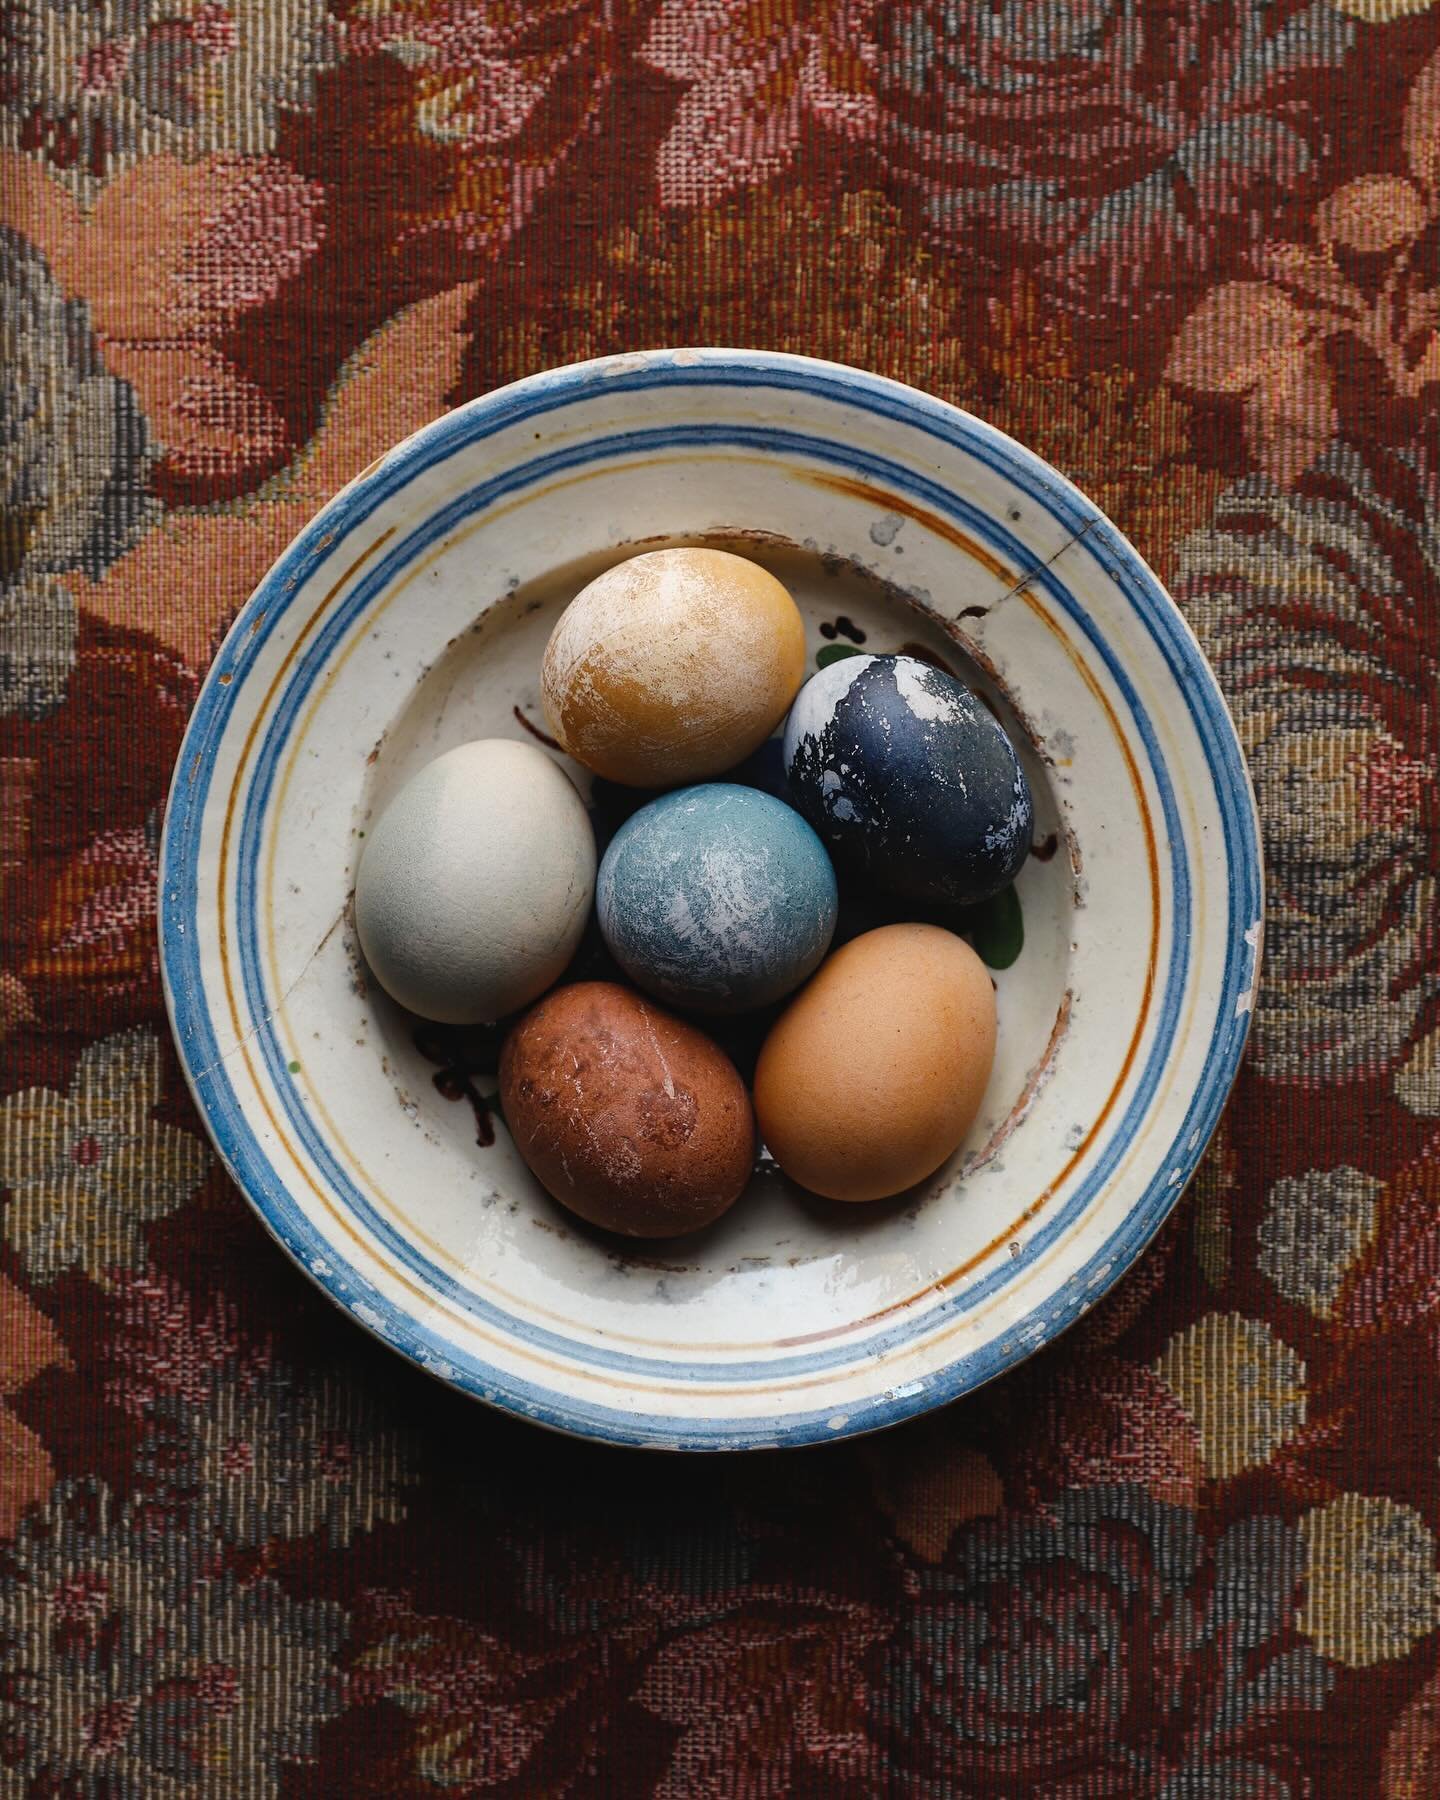 Happy Easter to those celebrating! Here's a little inspiration from Pomegranates &amp; Artichokes for your #easter celebration tables.

1. Naturally dyed eggs (which I made for #nowruz, not from my book) using red cabbage, onion skin, blueberries and